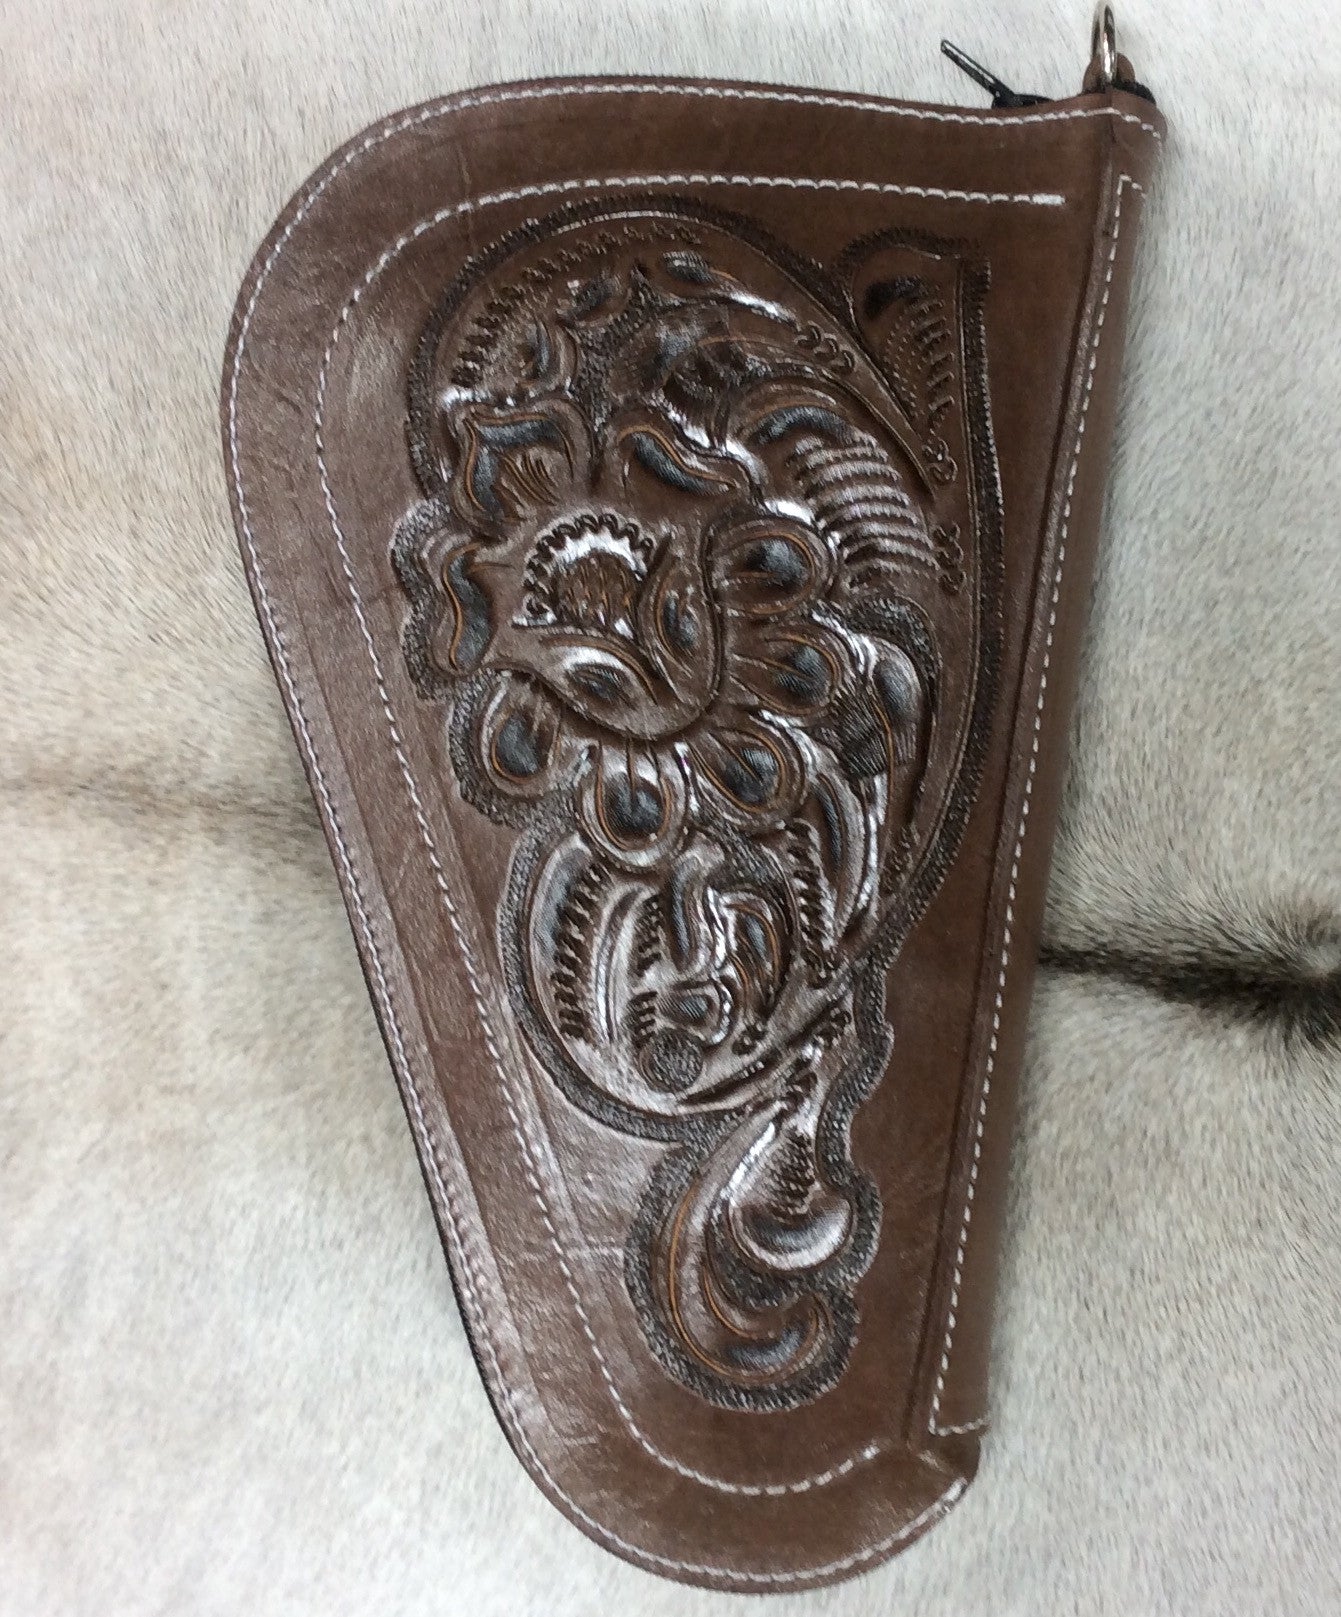 14" Pistol Case Tooled Leather Floral